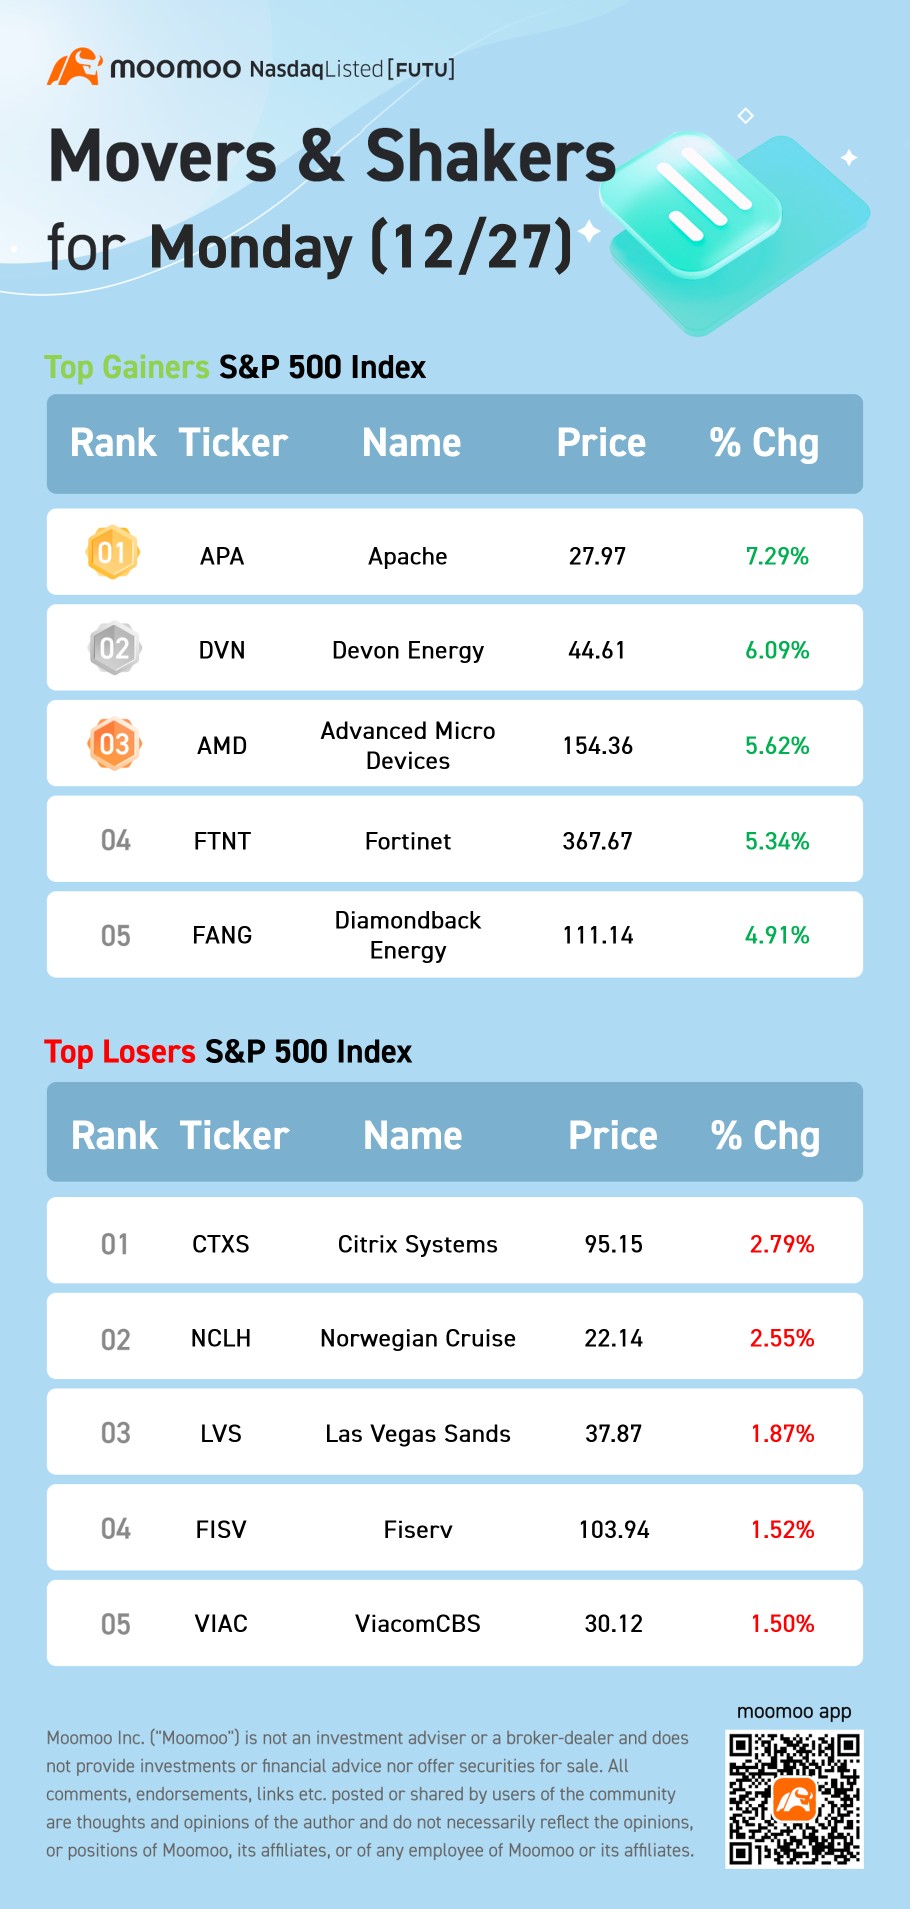 S&P 500 Movers for Monday (12/27)